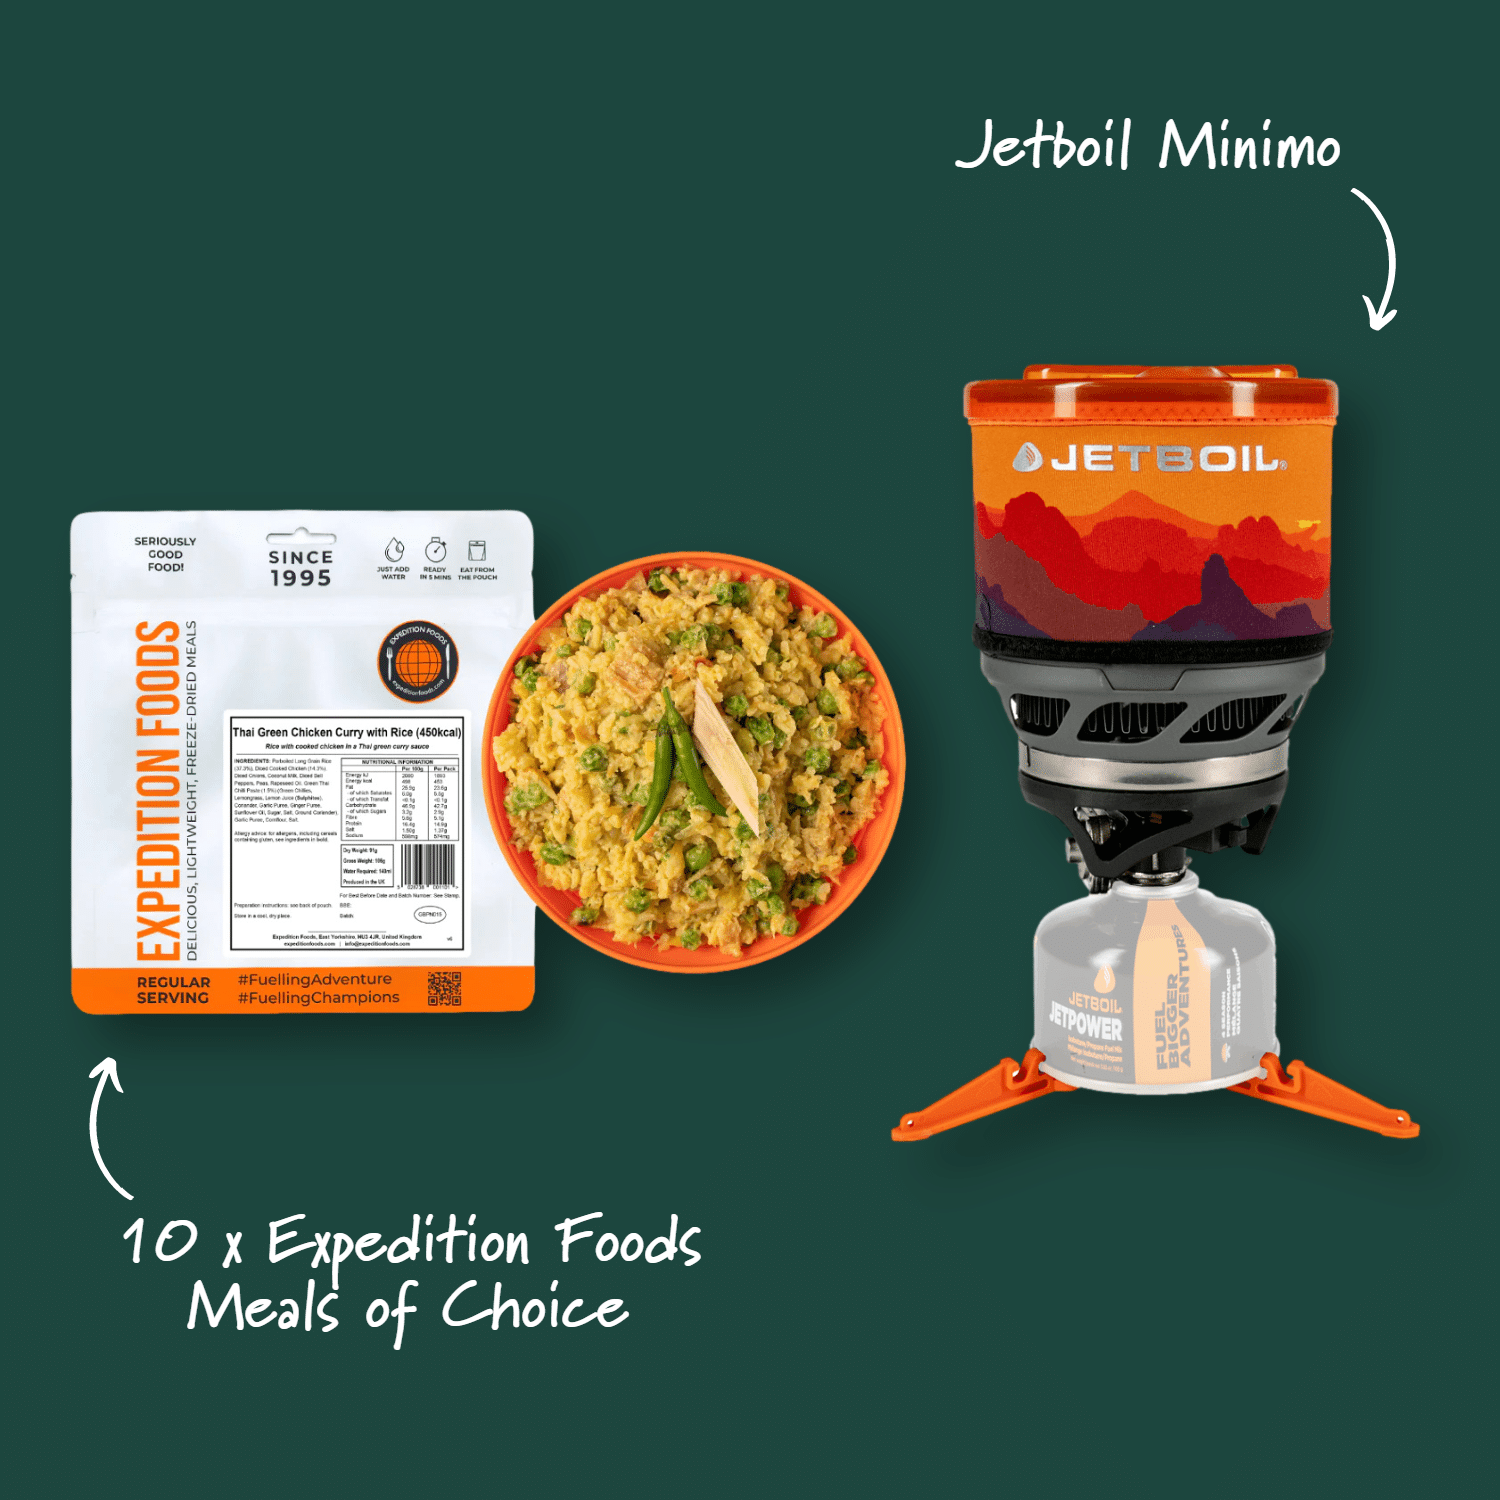 Jetboil Minimo + 10 Expedition Foods Meals